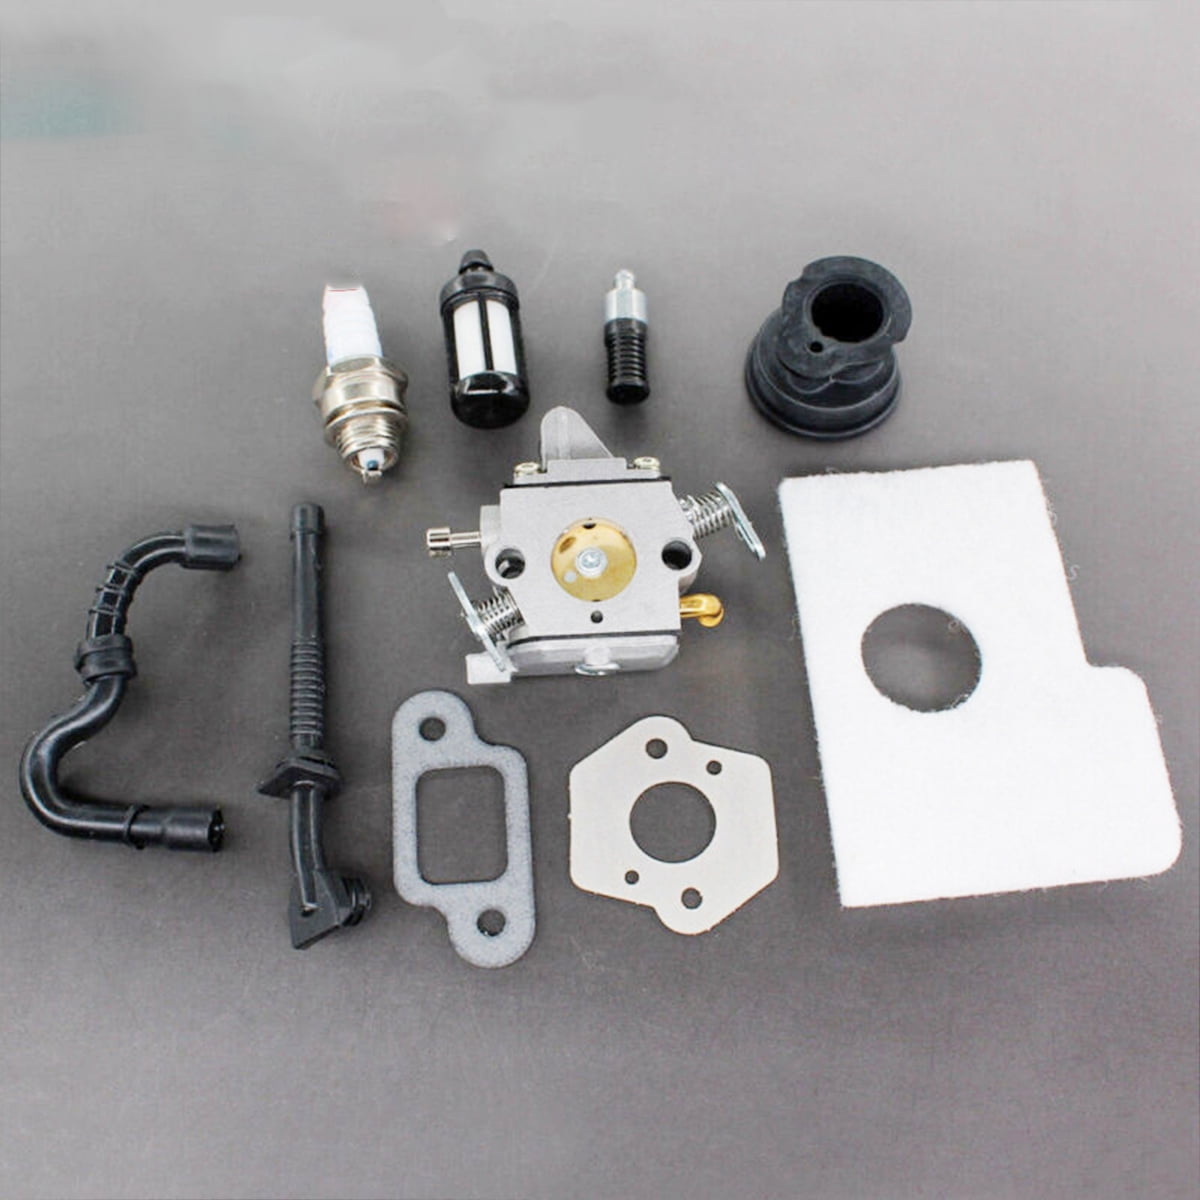 Carburetor Oil Filter Kit for Stihl MS017 MS018 170 180 MS170 MS180 Chainsaw 